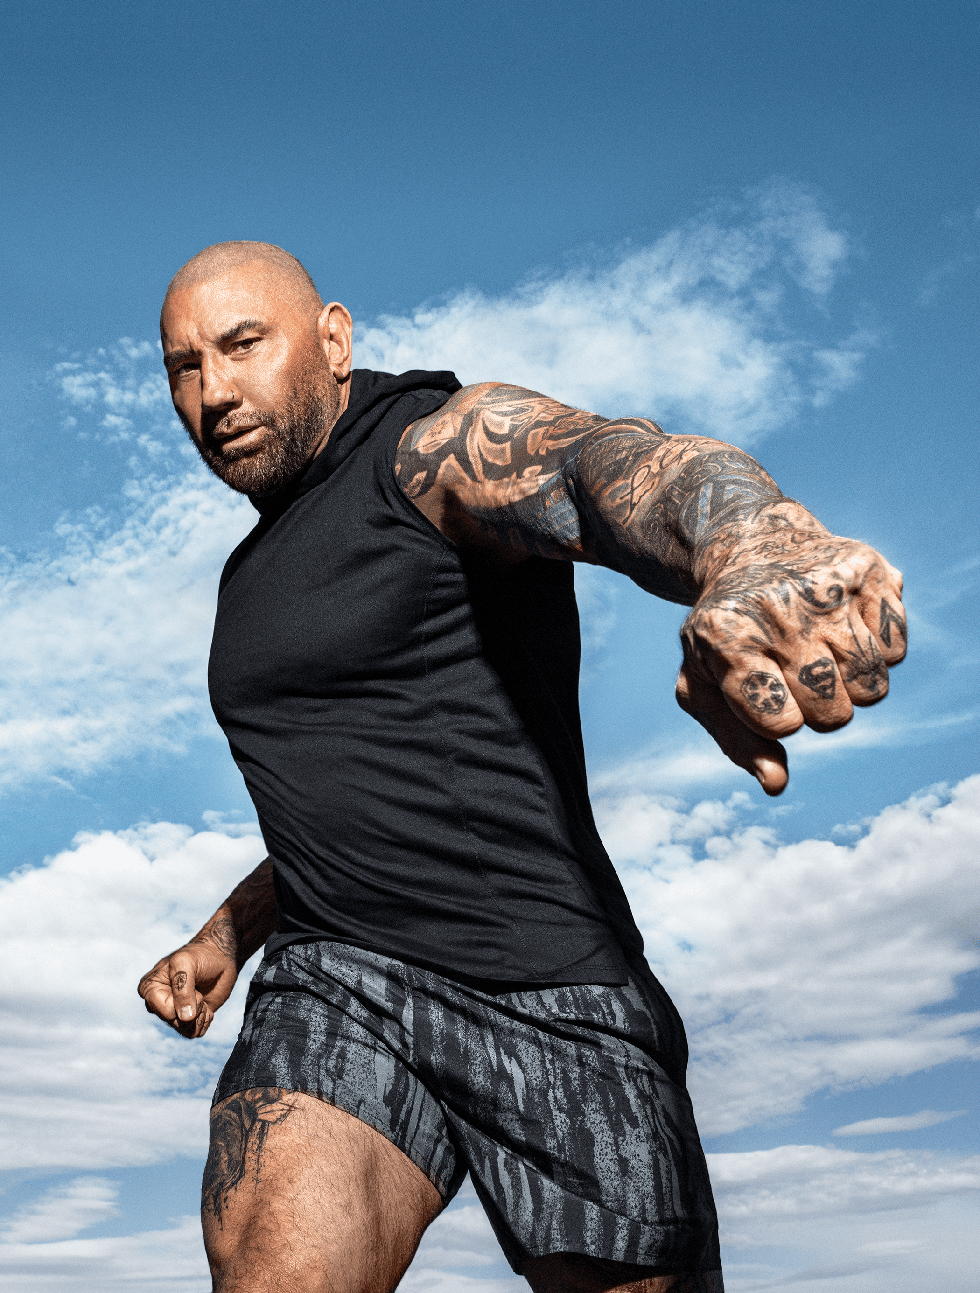 Dave Bautista Talks Dune, Wrestling, and Chasing His Dreams